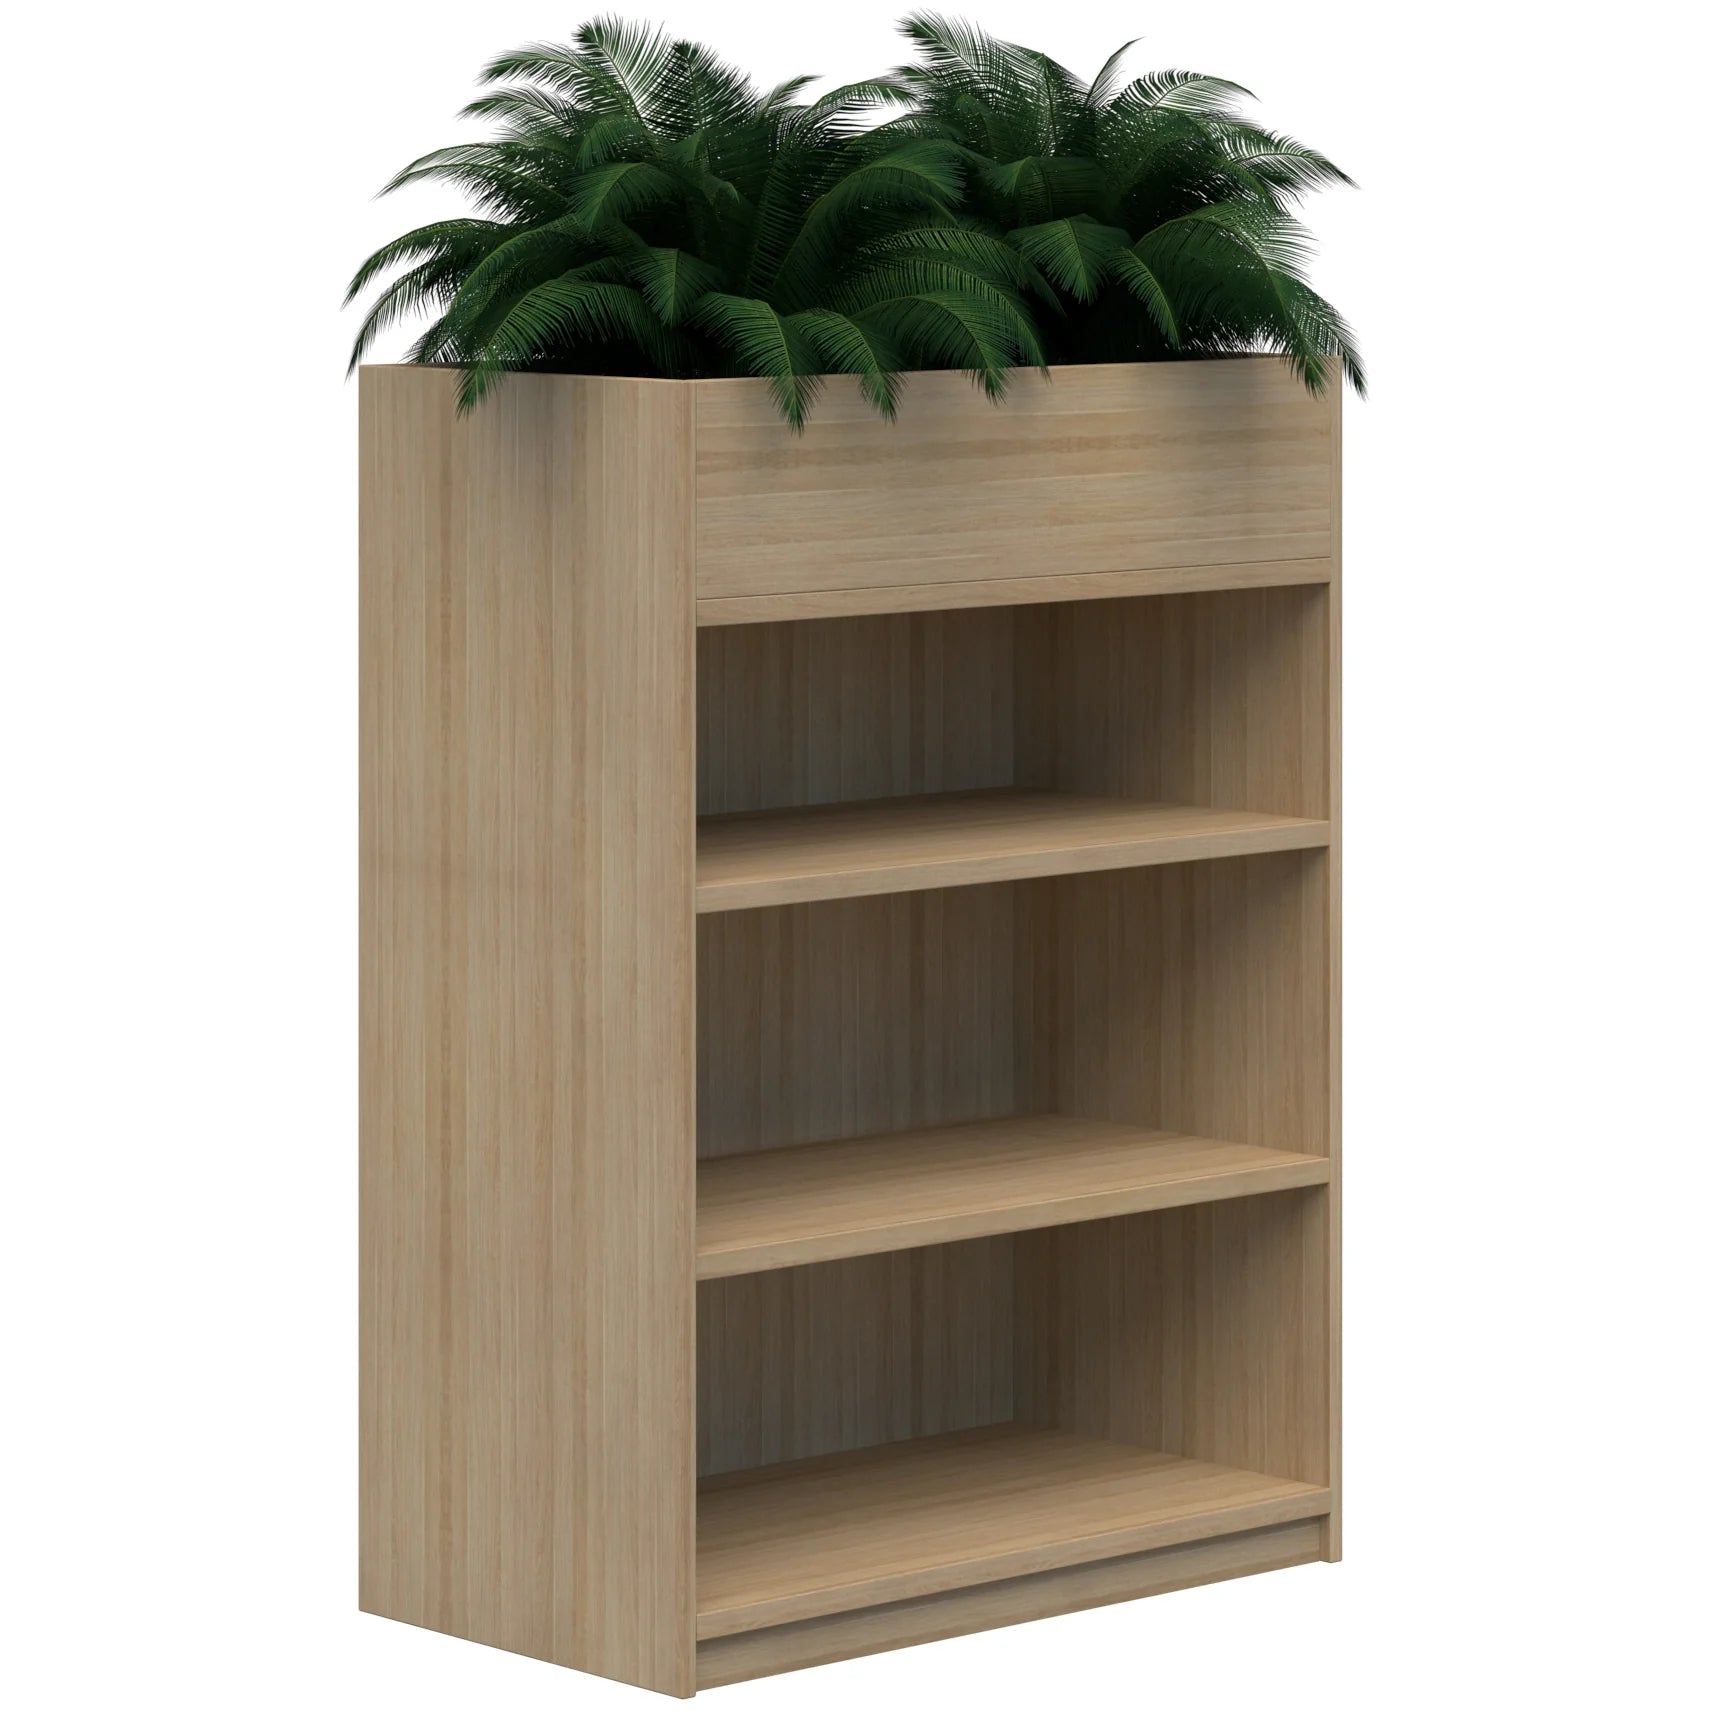 Three tier bookcase with built in planter box on top in classic oak colour.